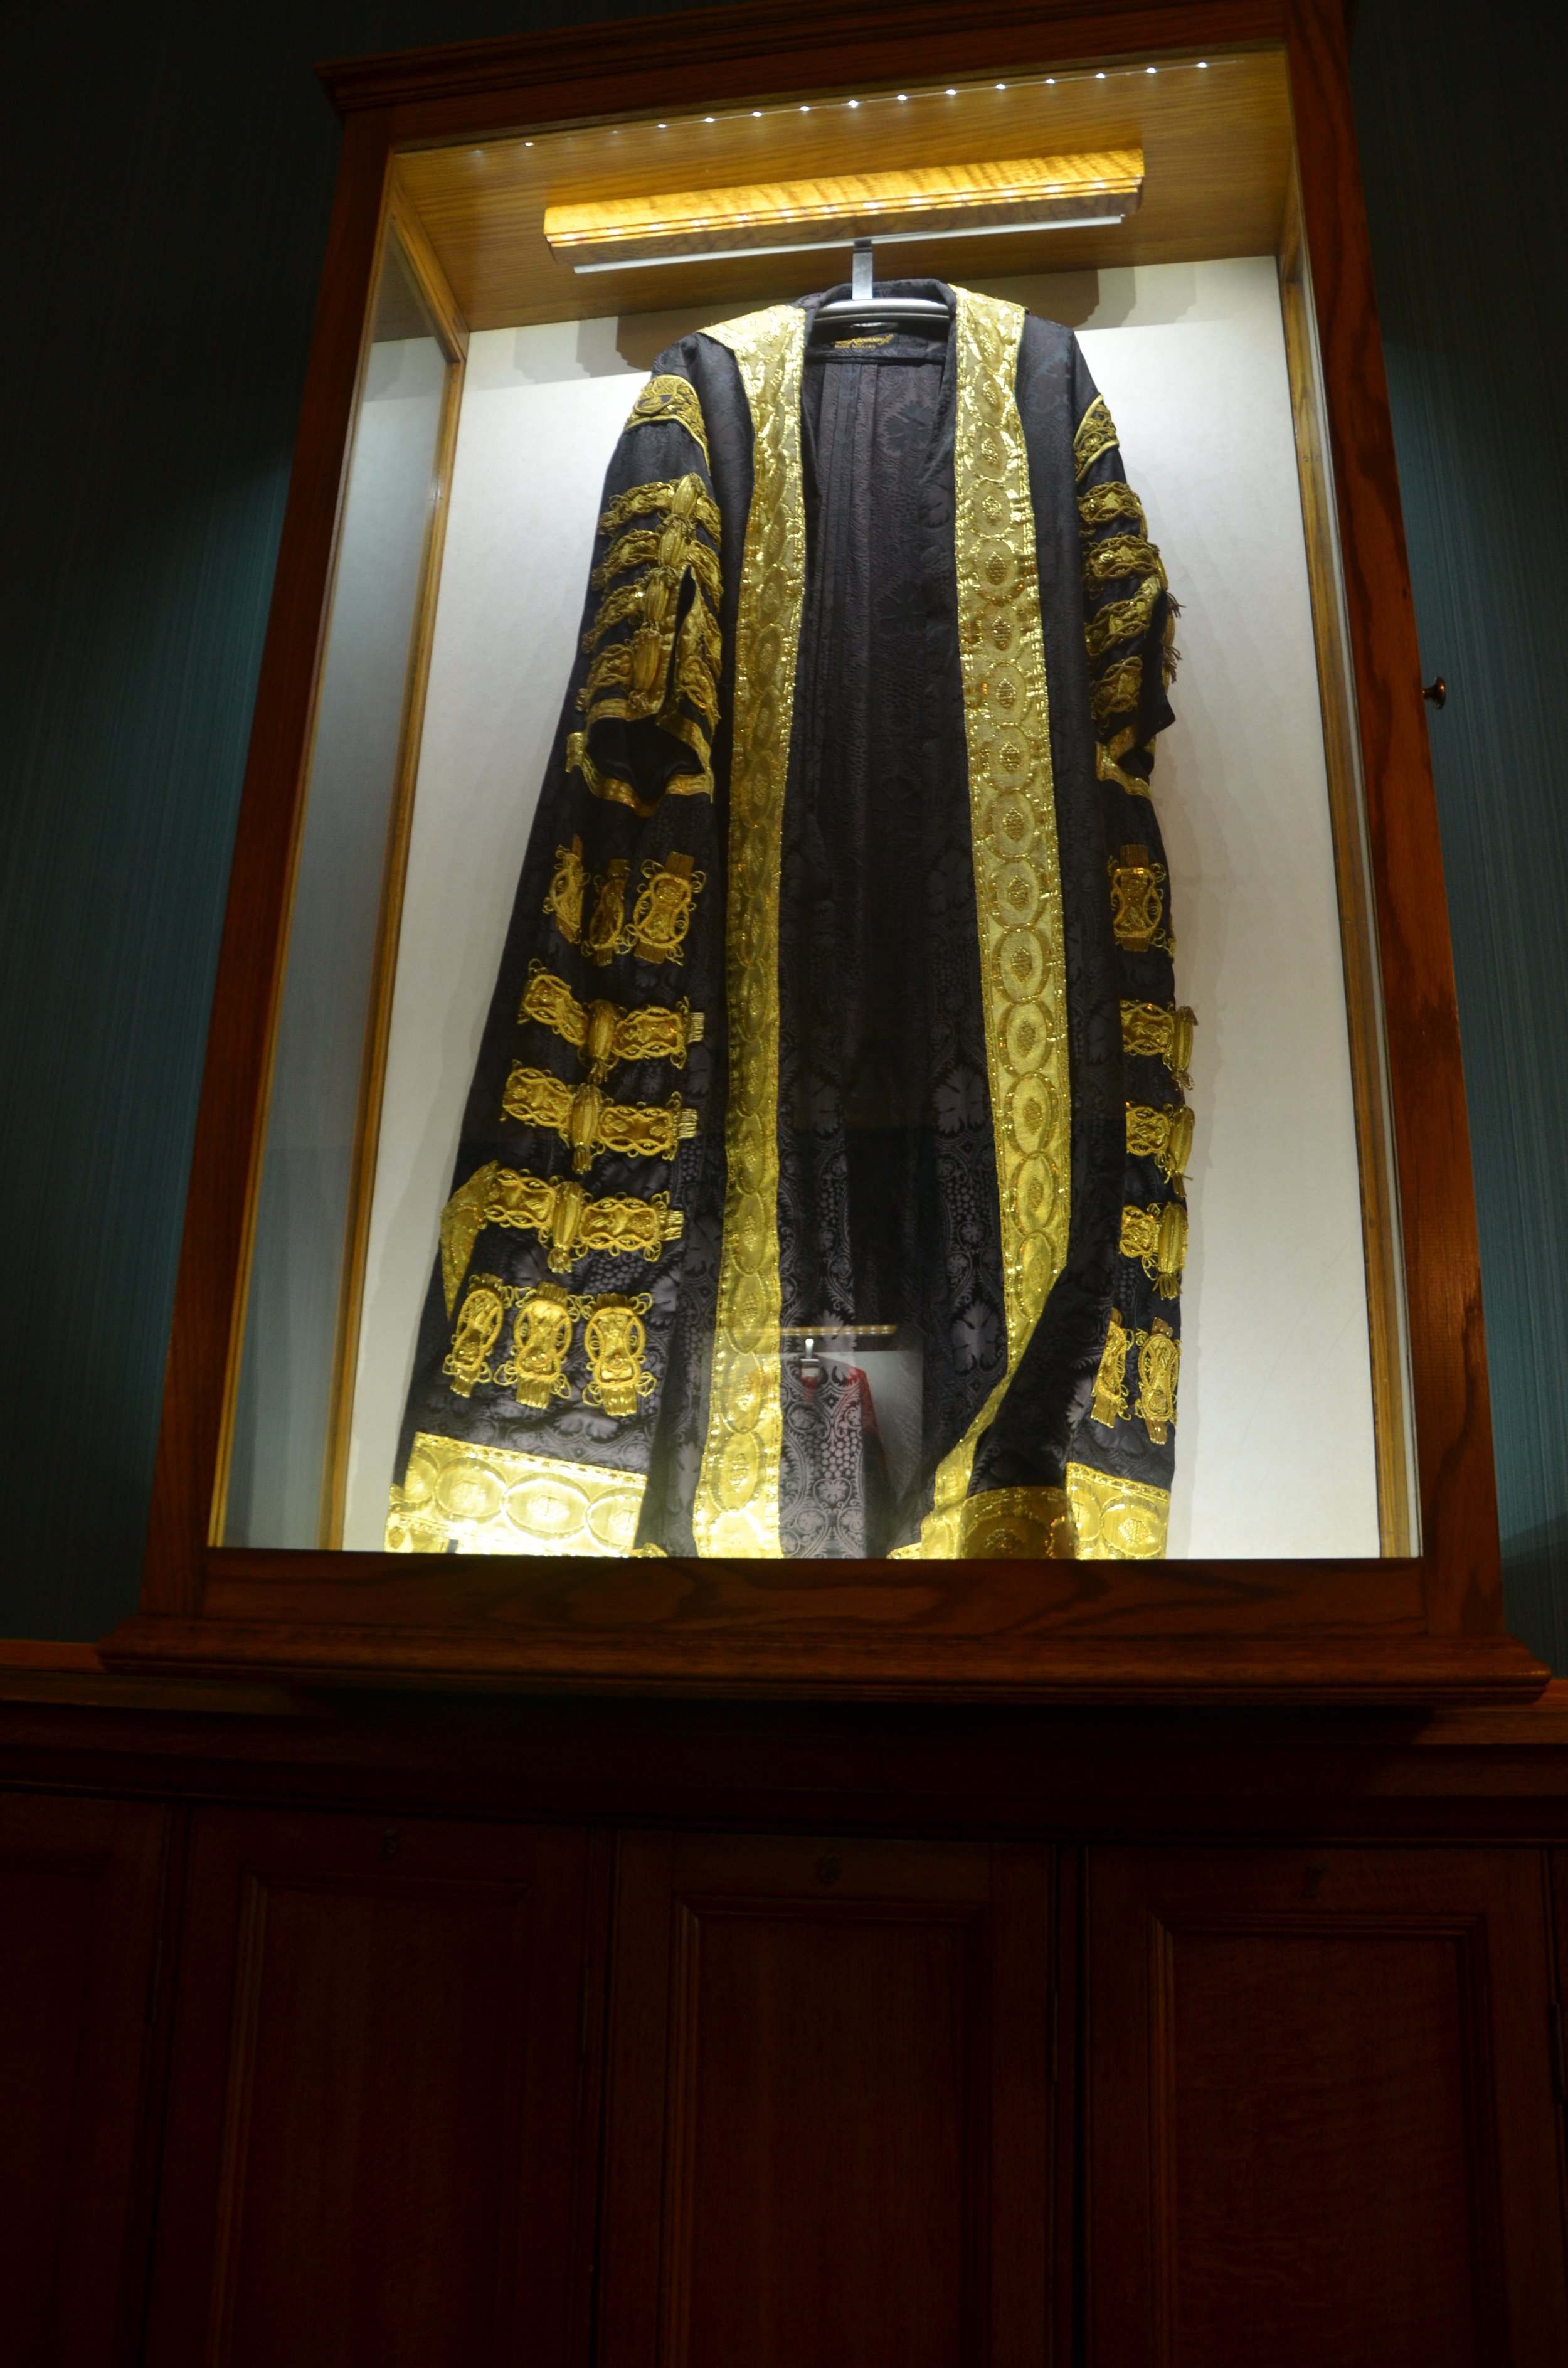 Example of a Lord Mayors' Robe-Belfast City Hall